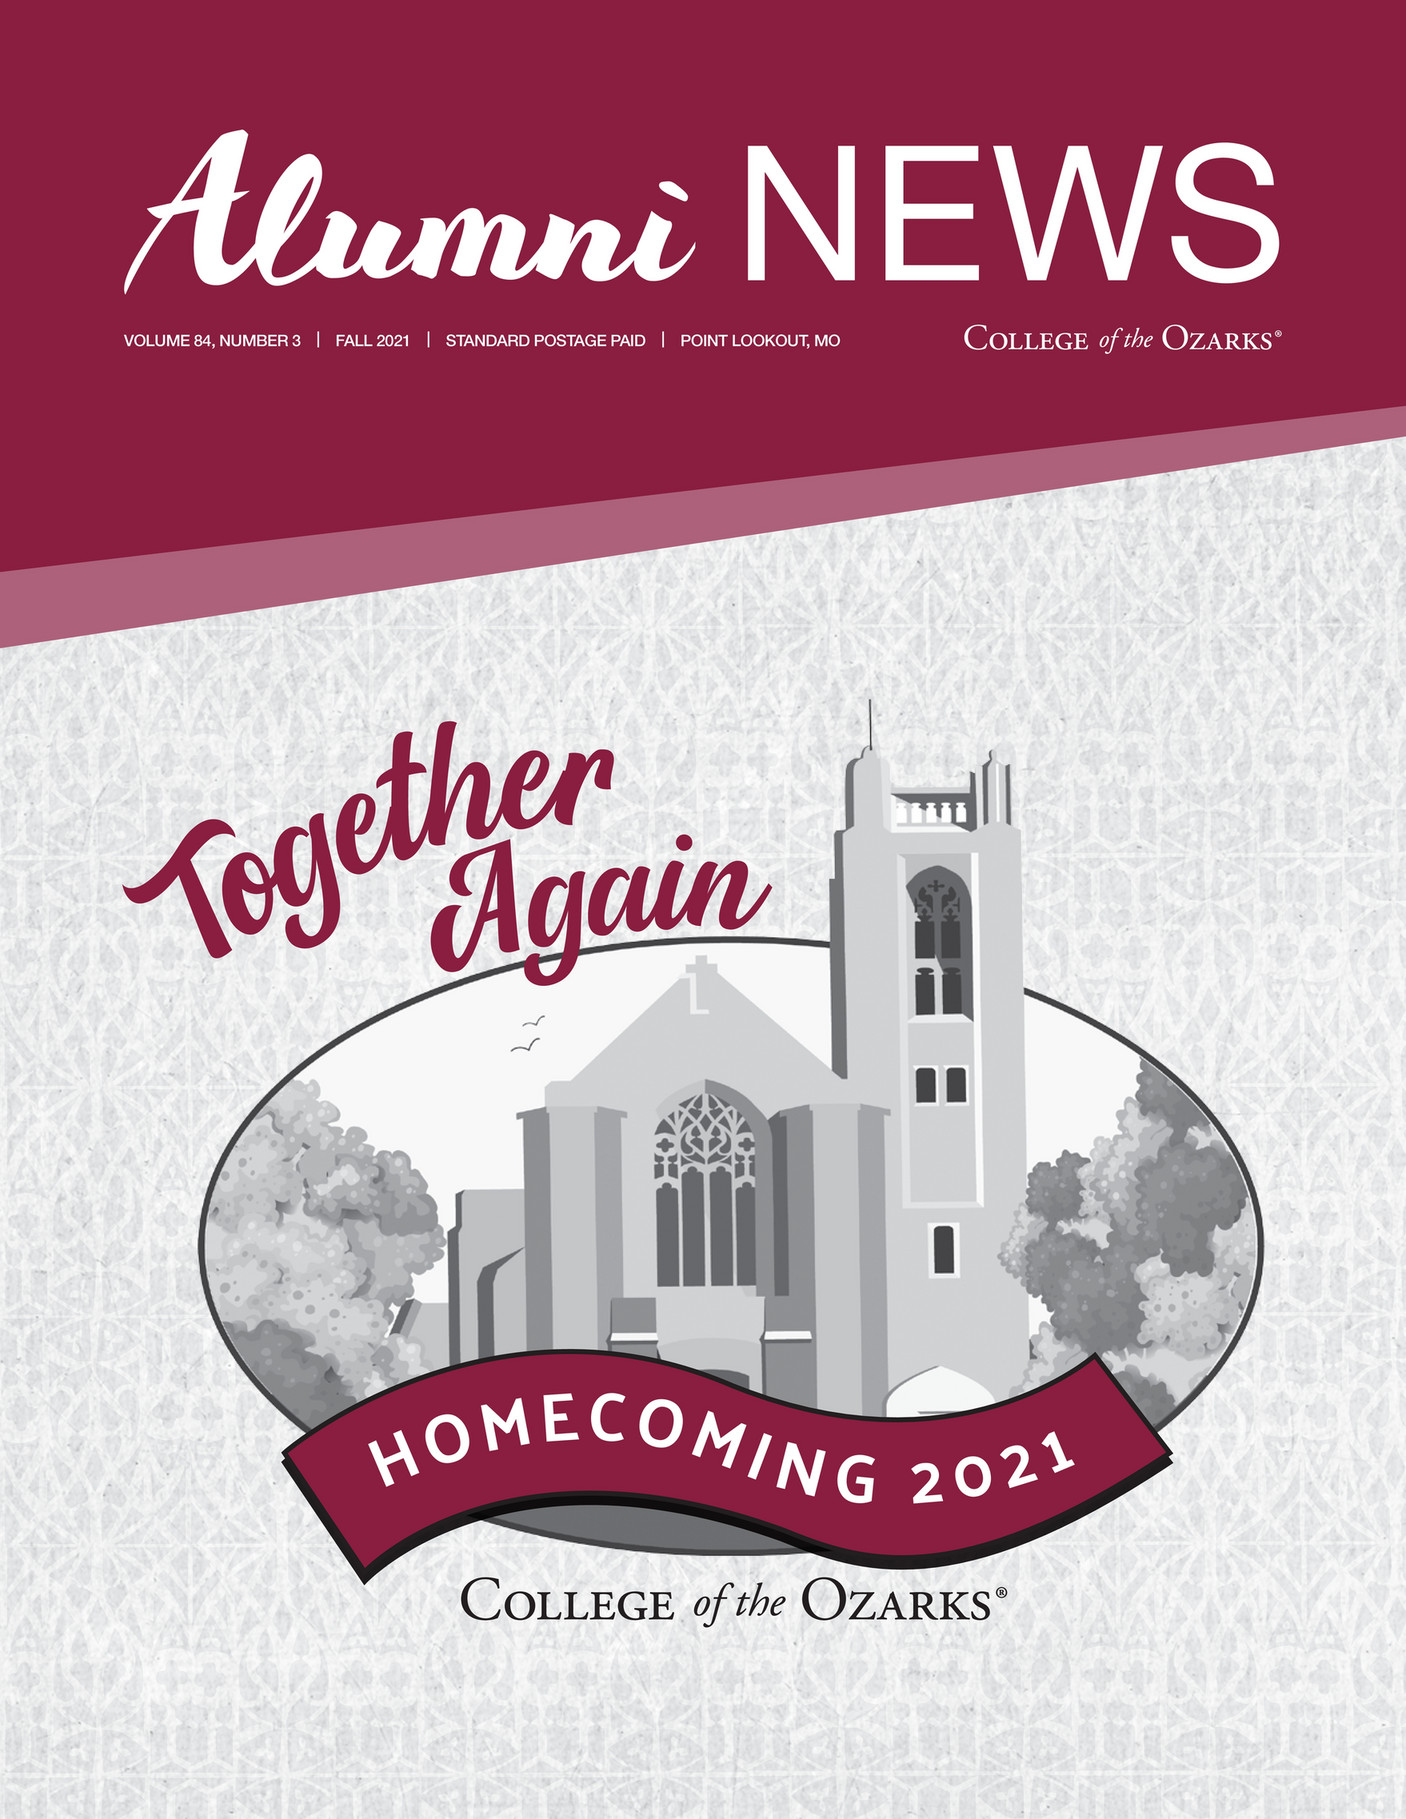 College of the Ozarks - Fall 2021 Alumni News - Page 2